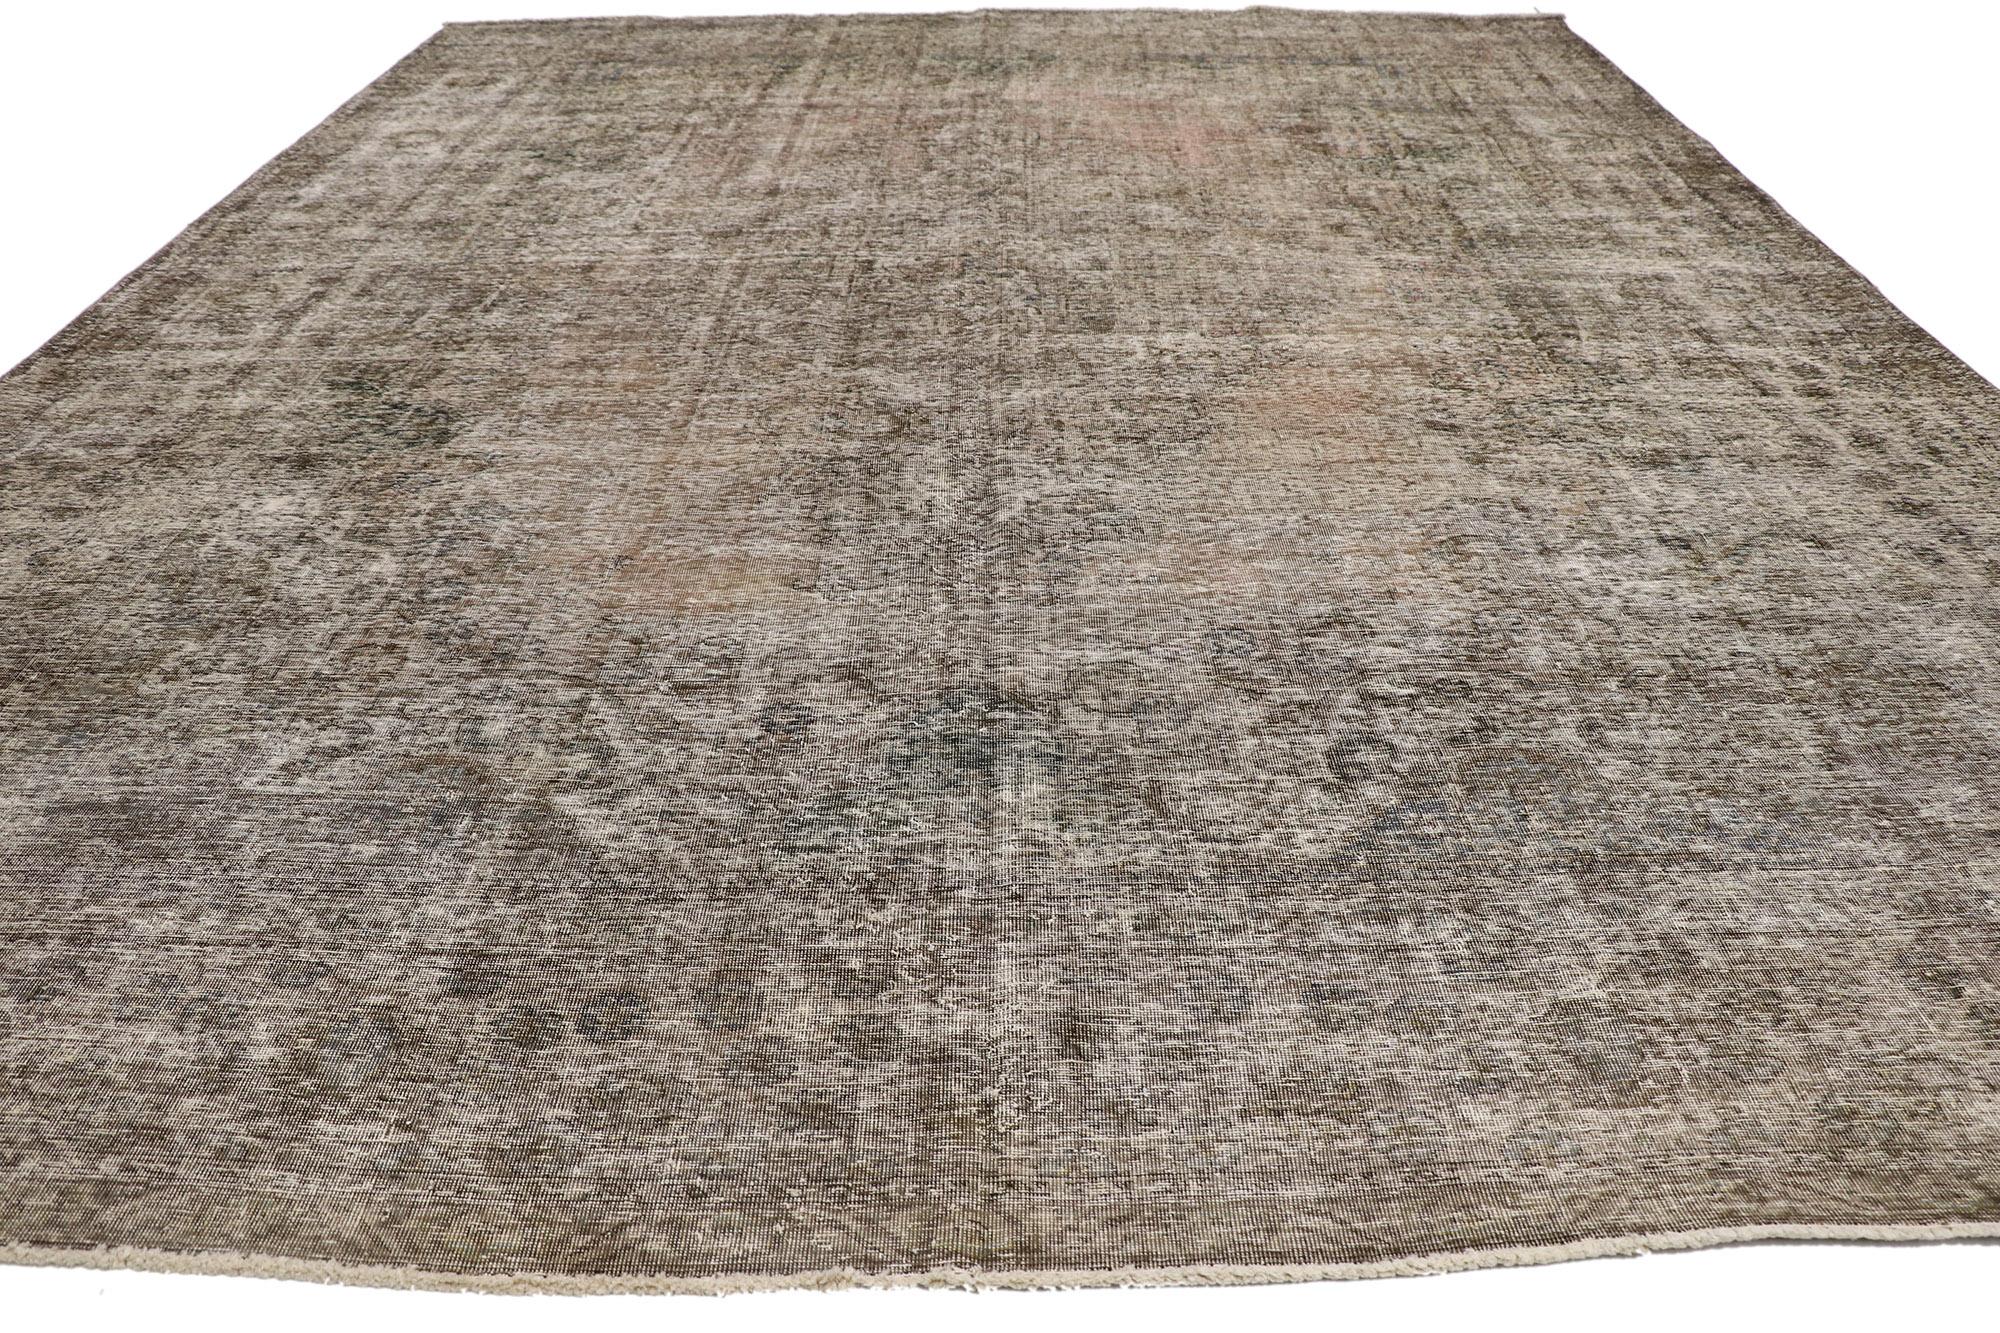 Hand-Knotted Distressed Vintage Persian Tabriz Rug with Rustic Farmhouse Chippendale Style